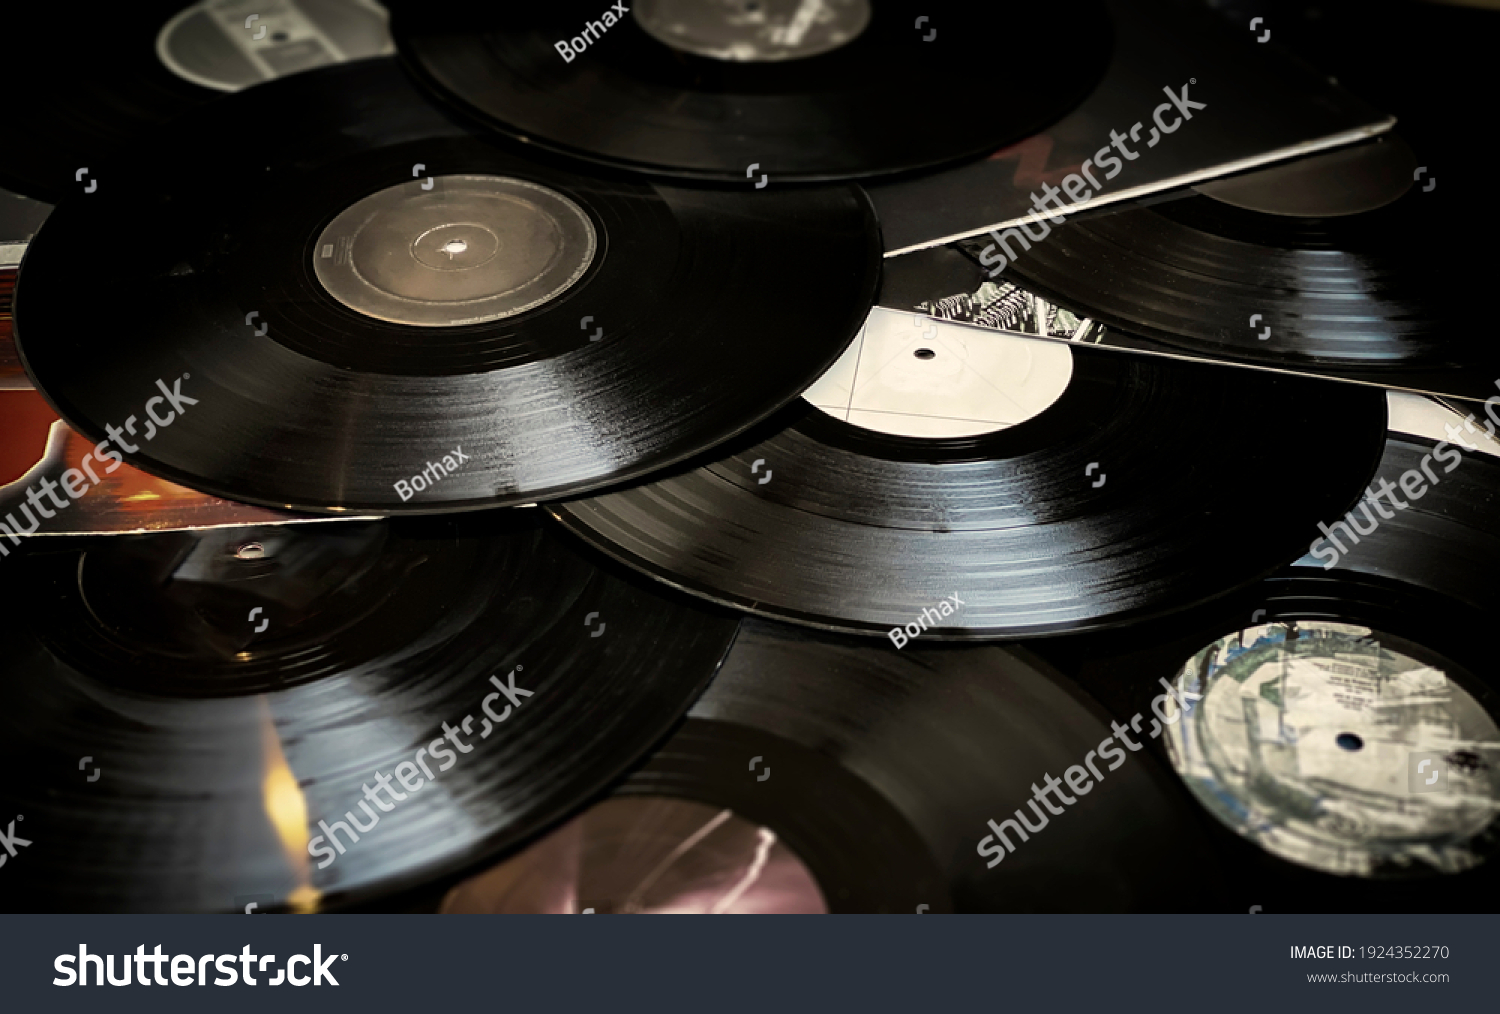 Detail Images Of Record Albums Nomer 43